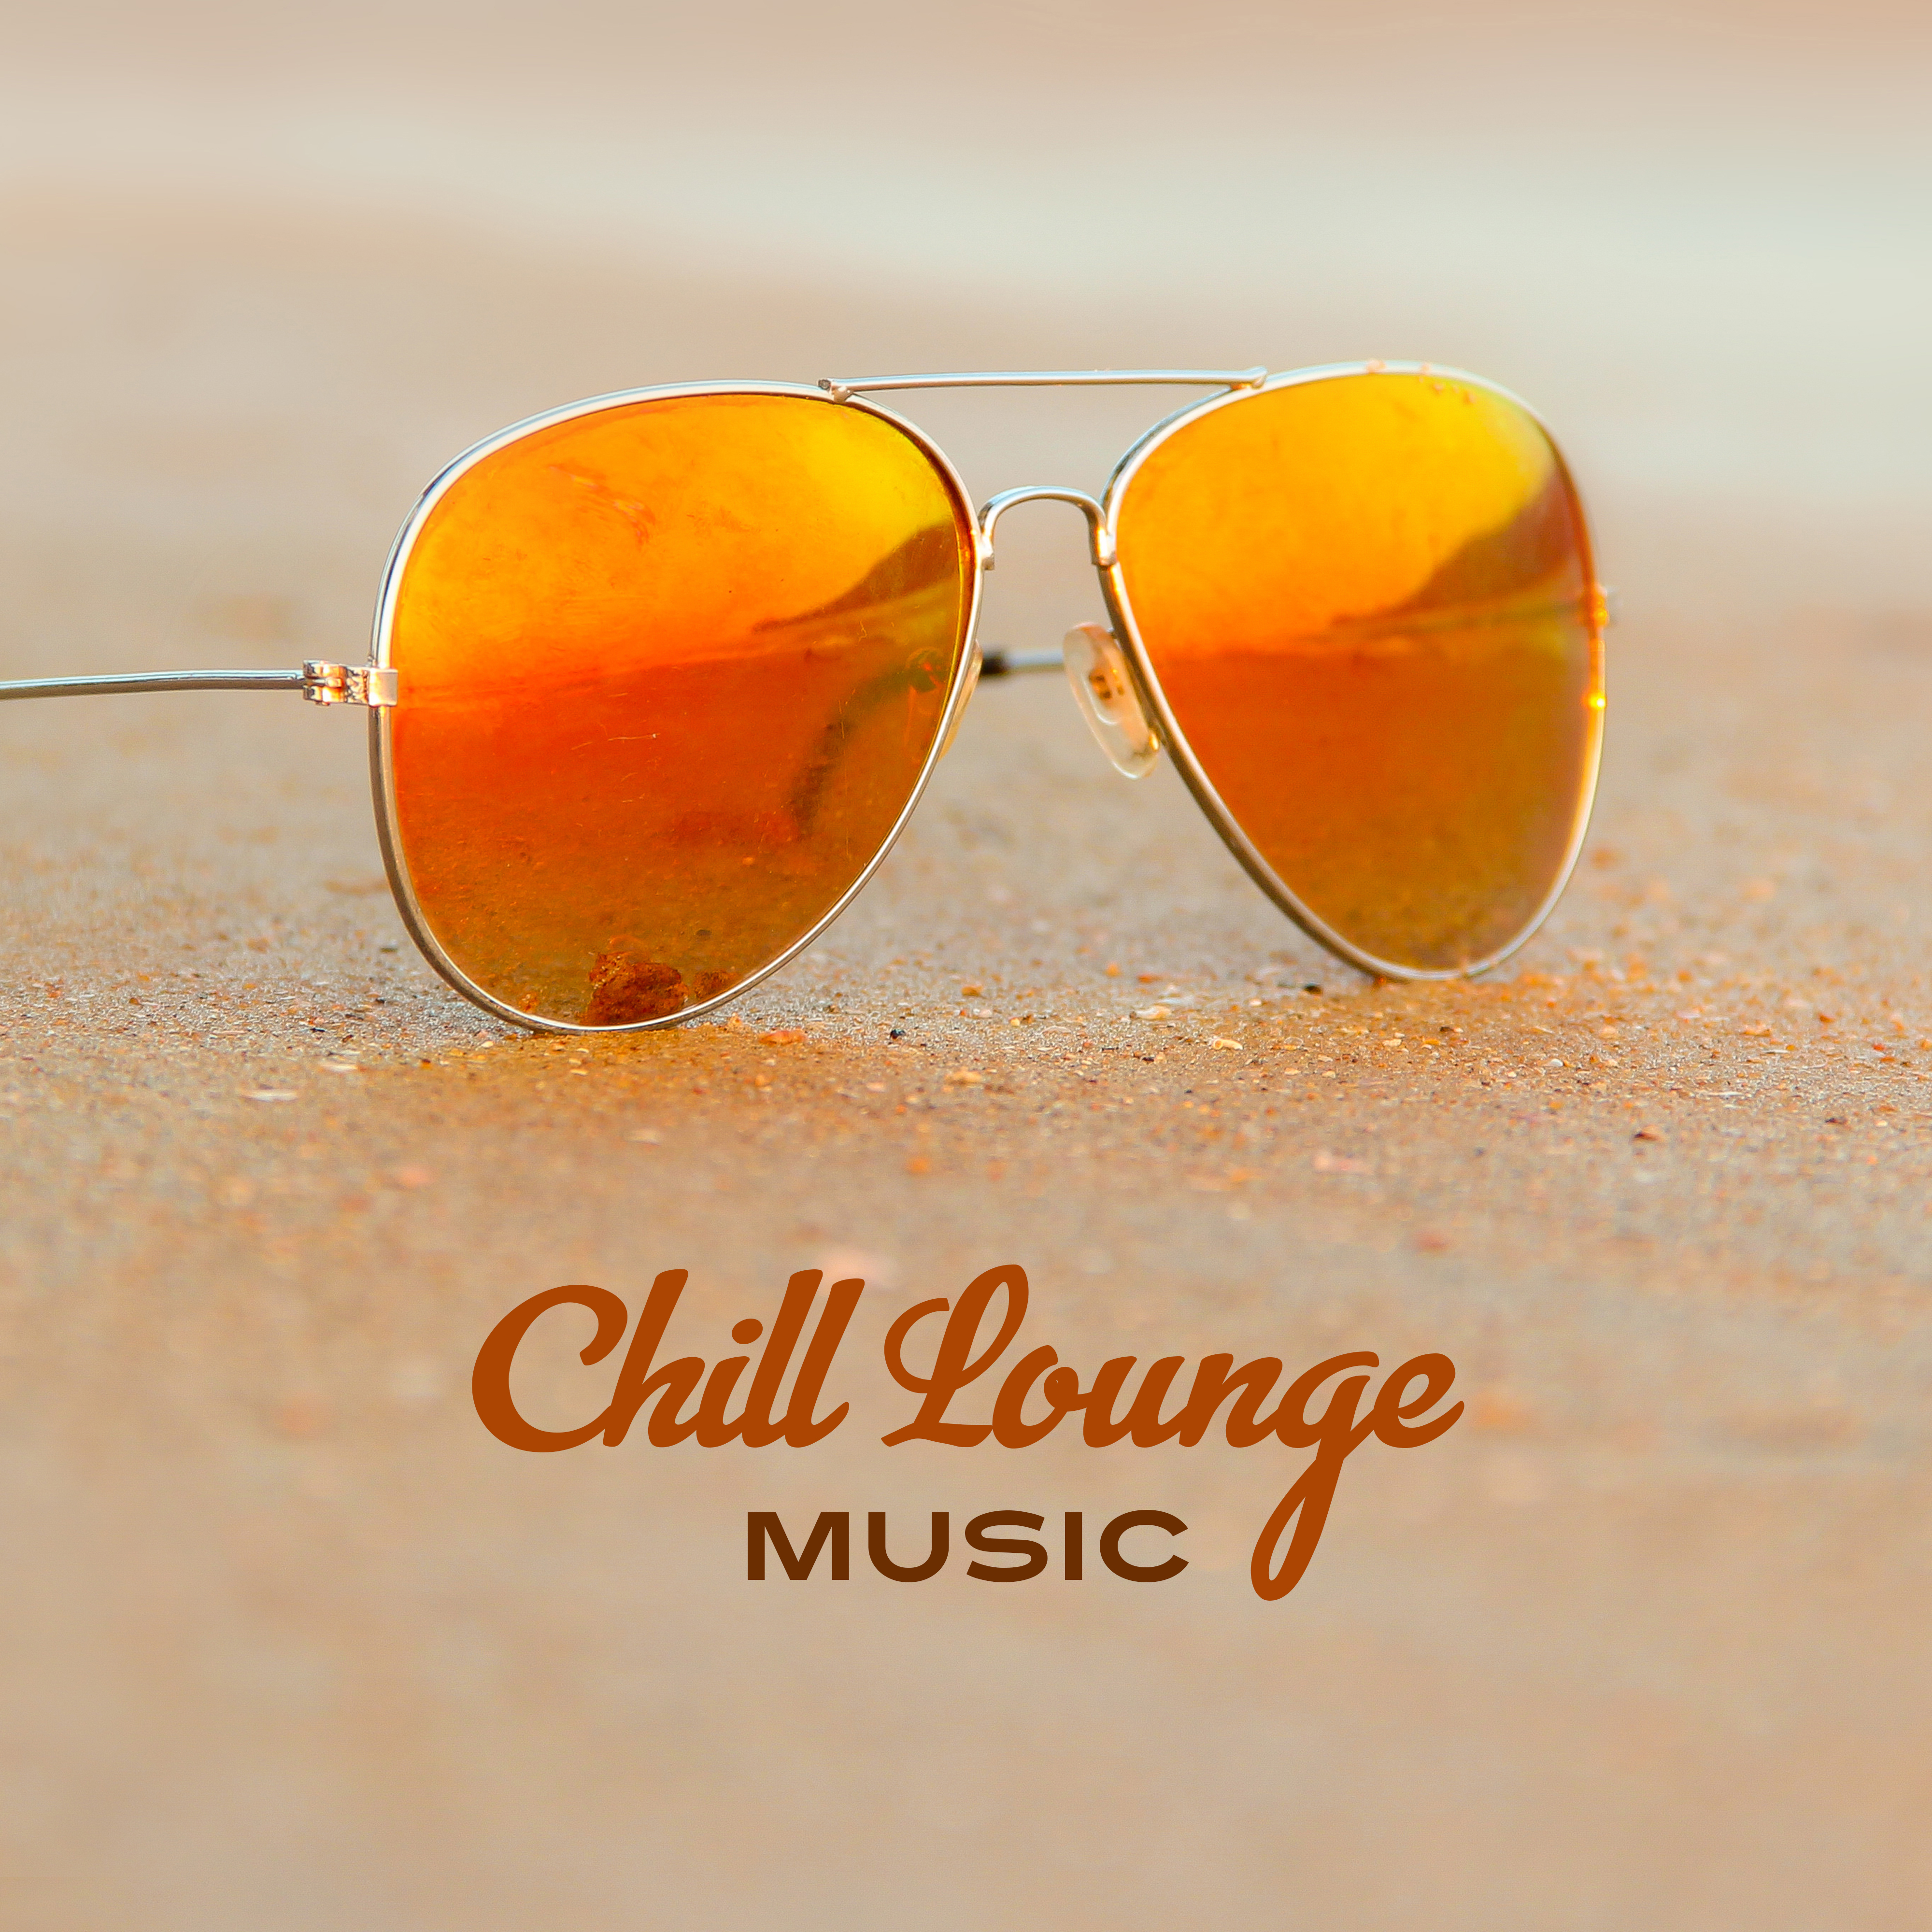 Chill Lounge Music – Calming Sounds, Summer Music to Relax, Tropical Island Sounds, Chilled Note